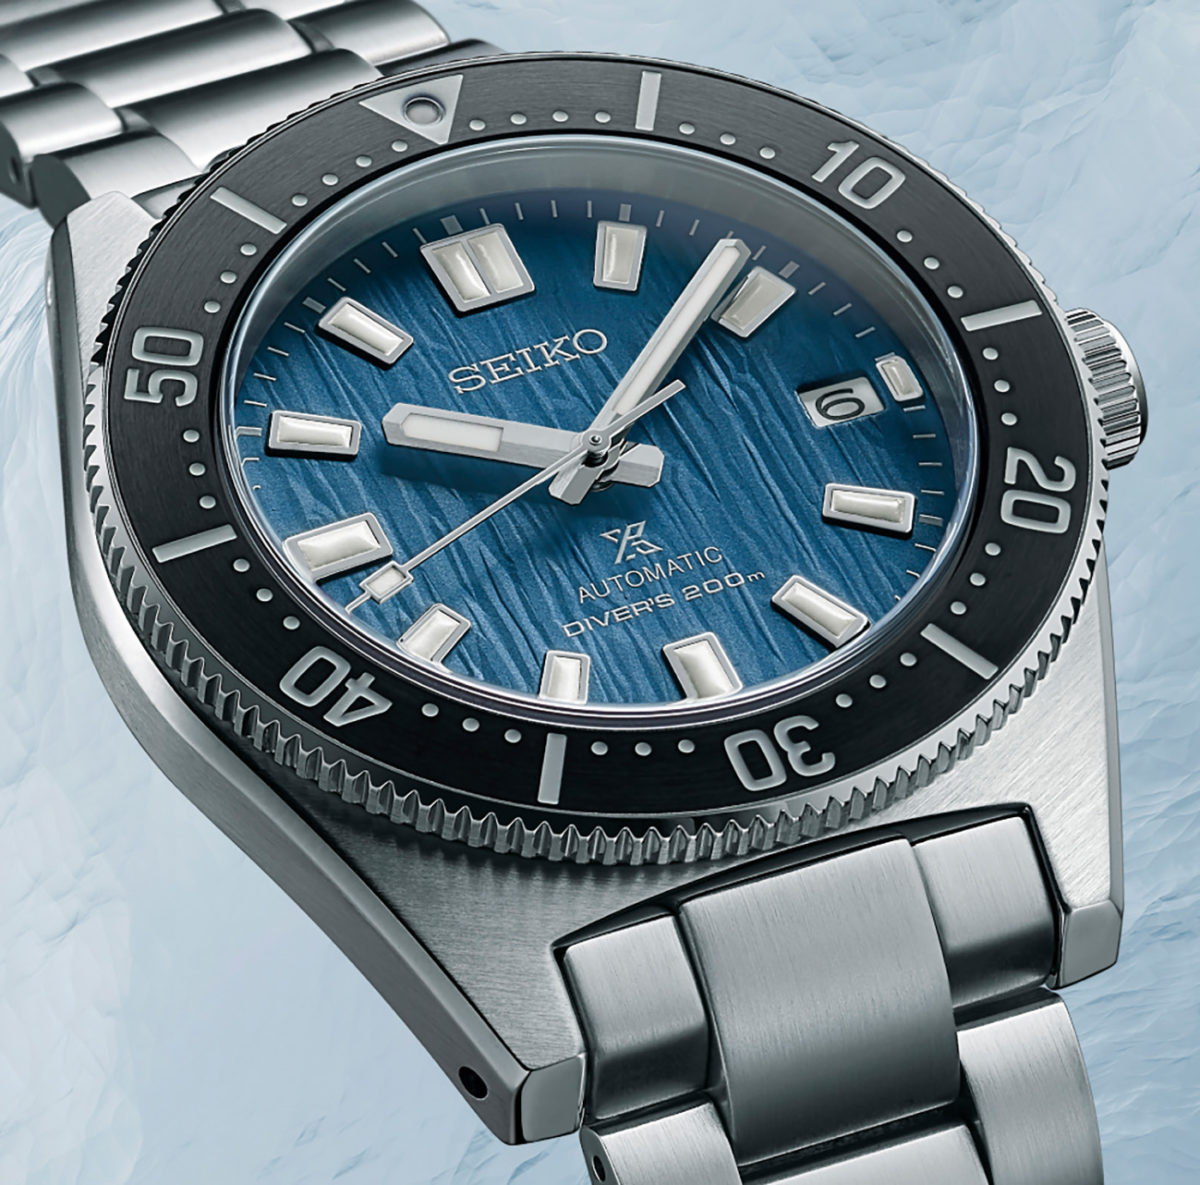 Seiko 'Save The Ocean' Dive Watches Look Good For A Good Cause